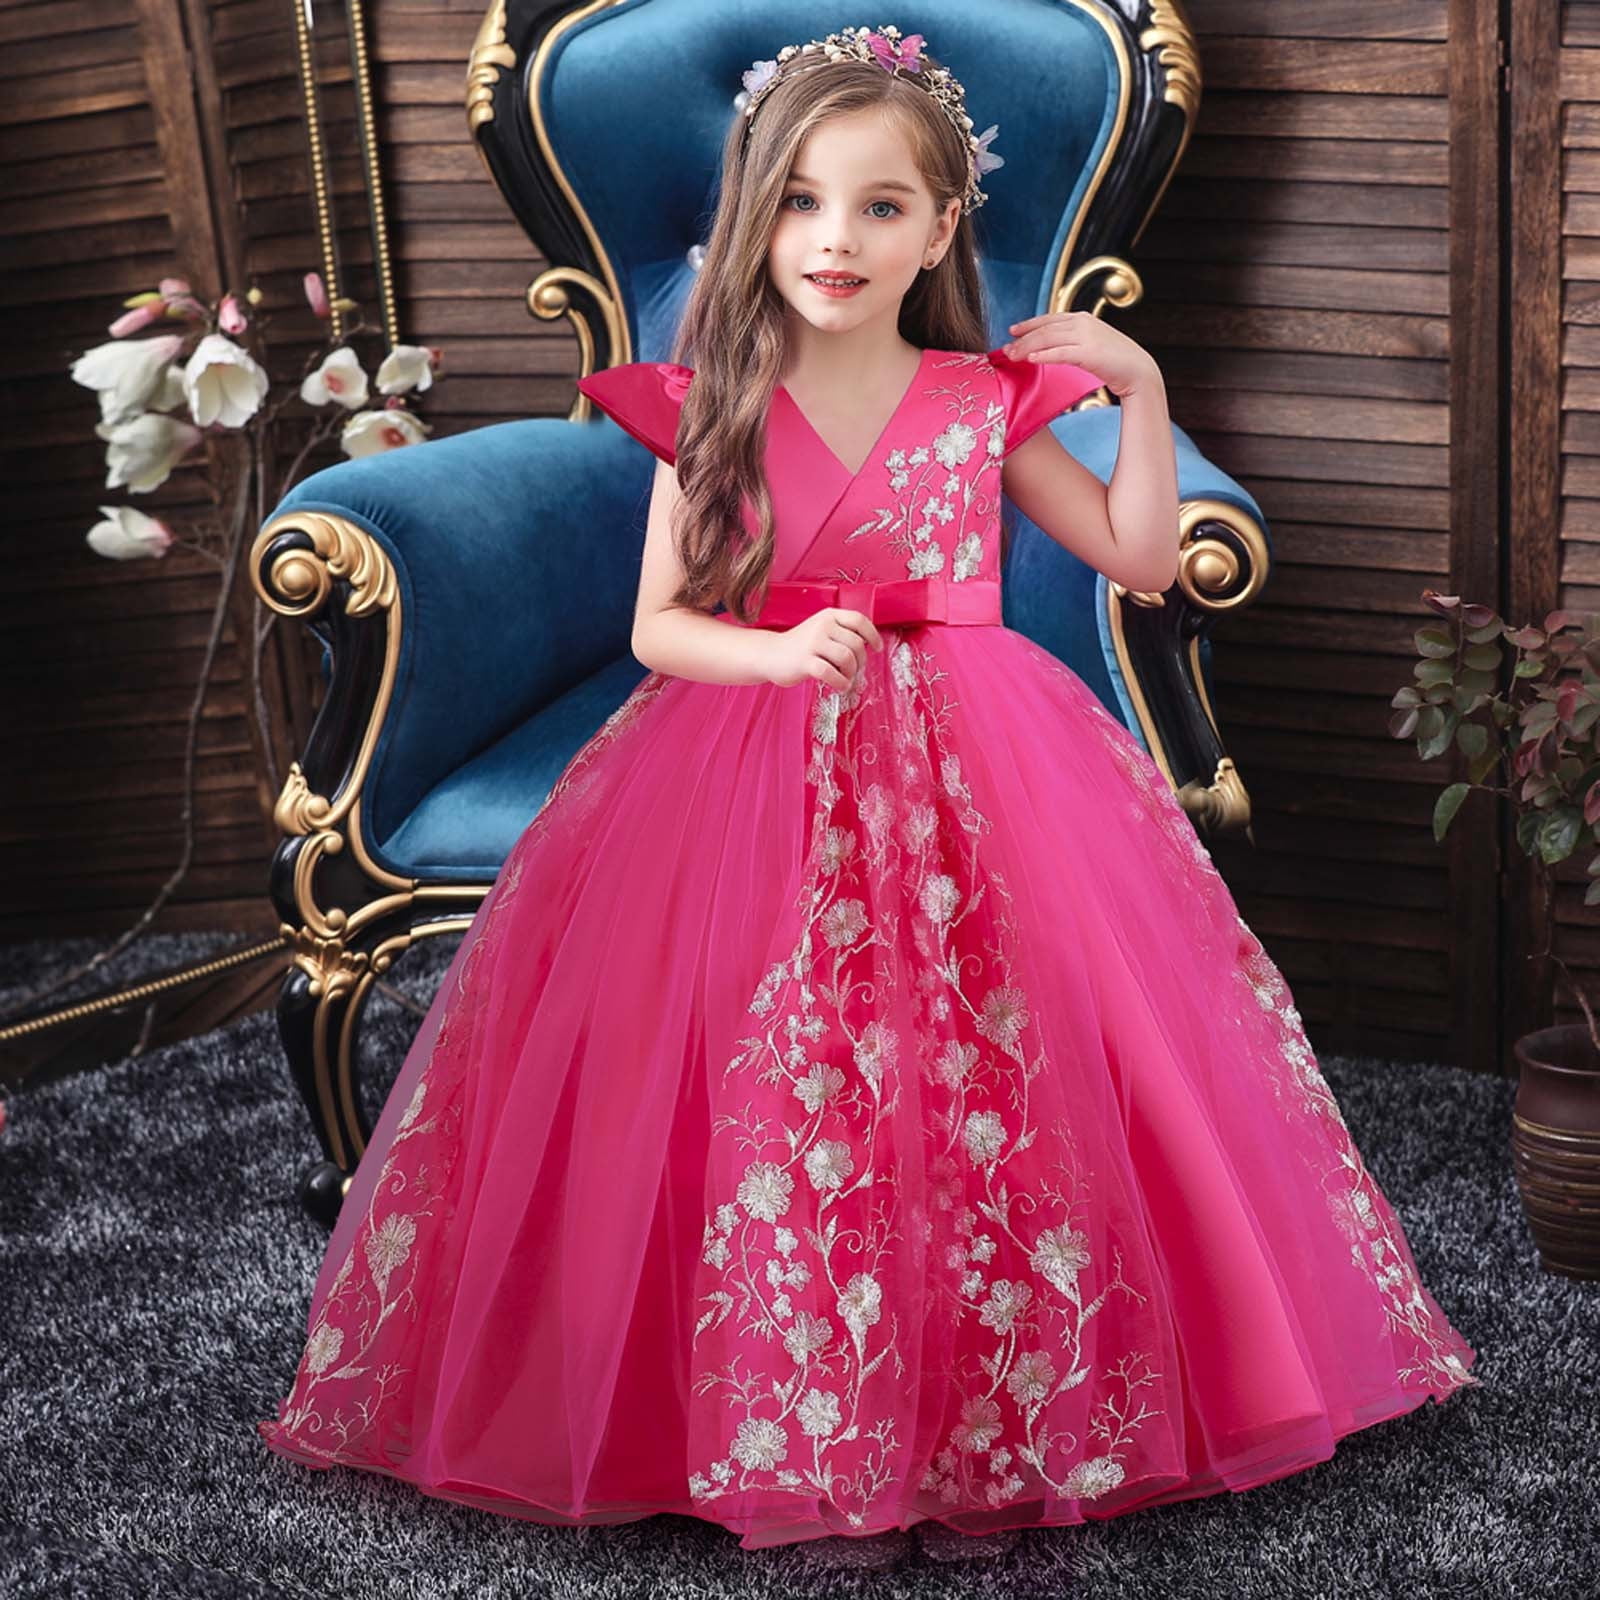 teenagers long gowns party wedding princess| Alibaba.com